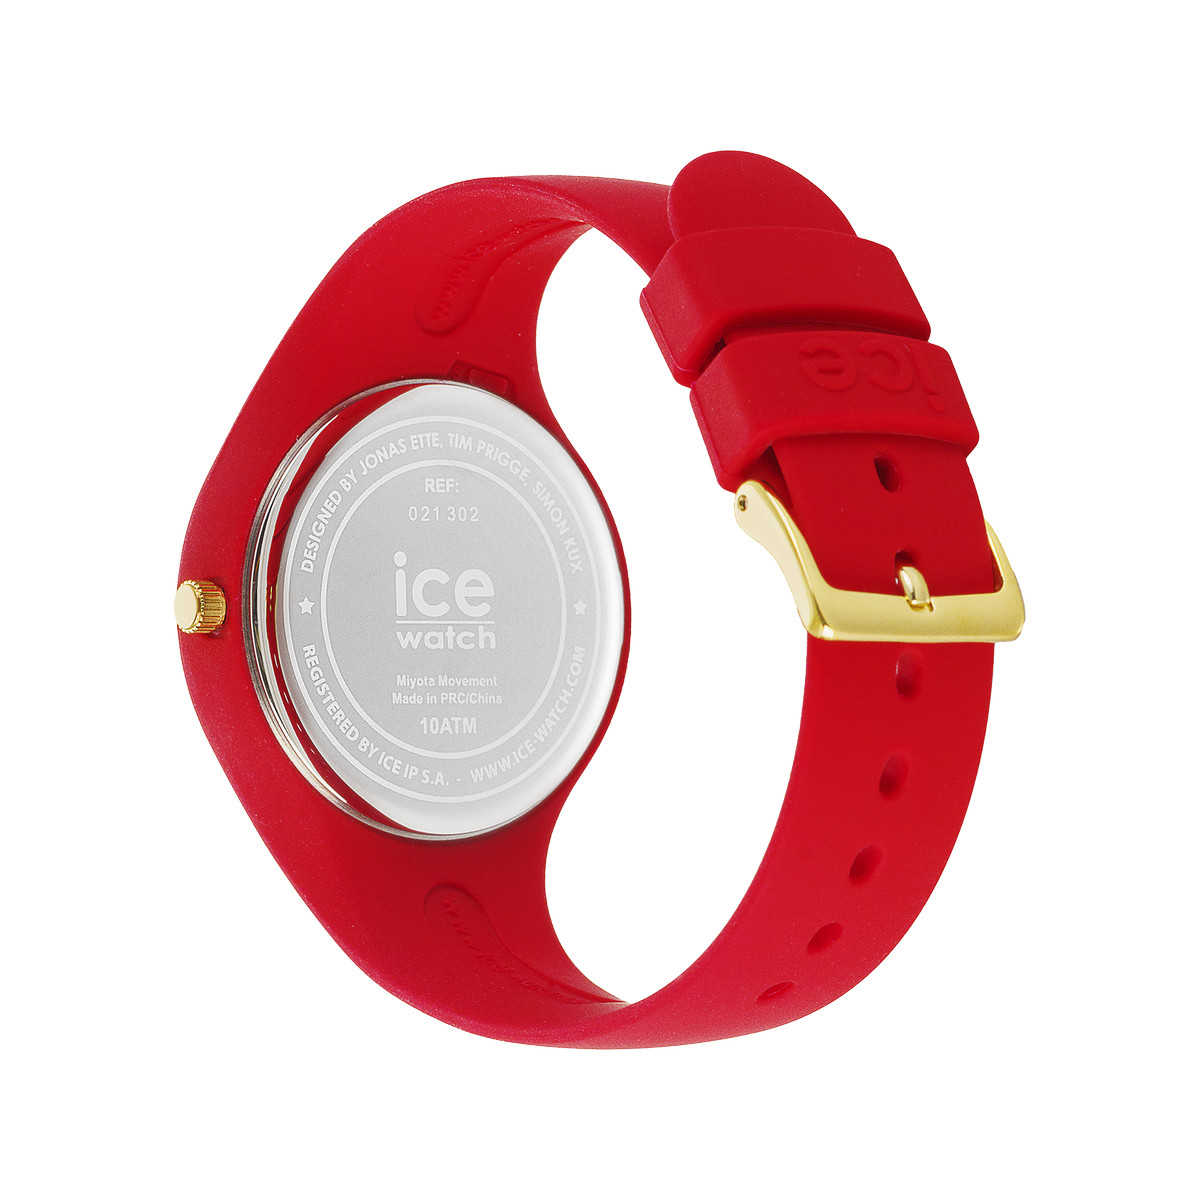 Montre ICE WATCH Ice cosmos femme bracelet silicone rouge - vue 3